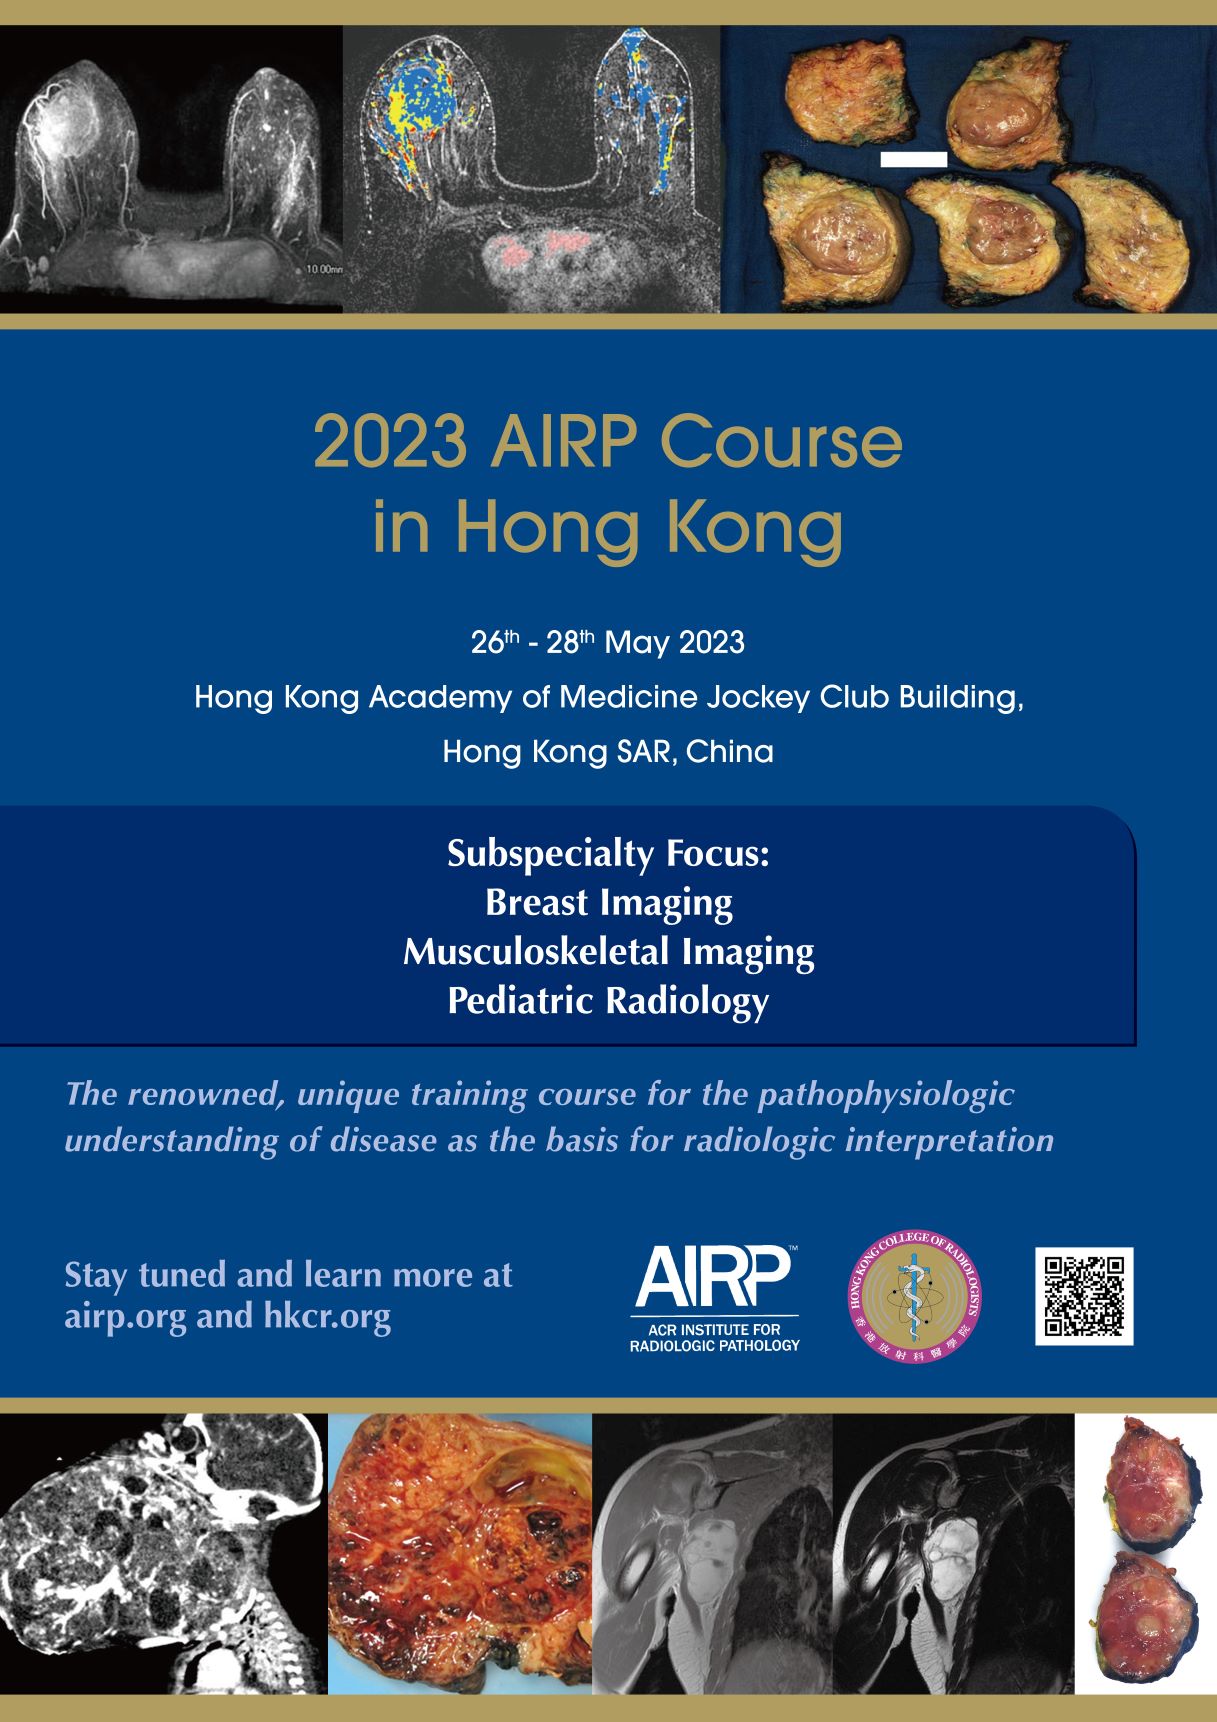 2023 AIRP Course in Hong Kong, 26 - 28 May 2023